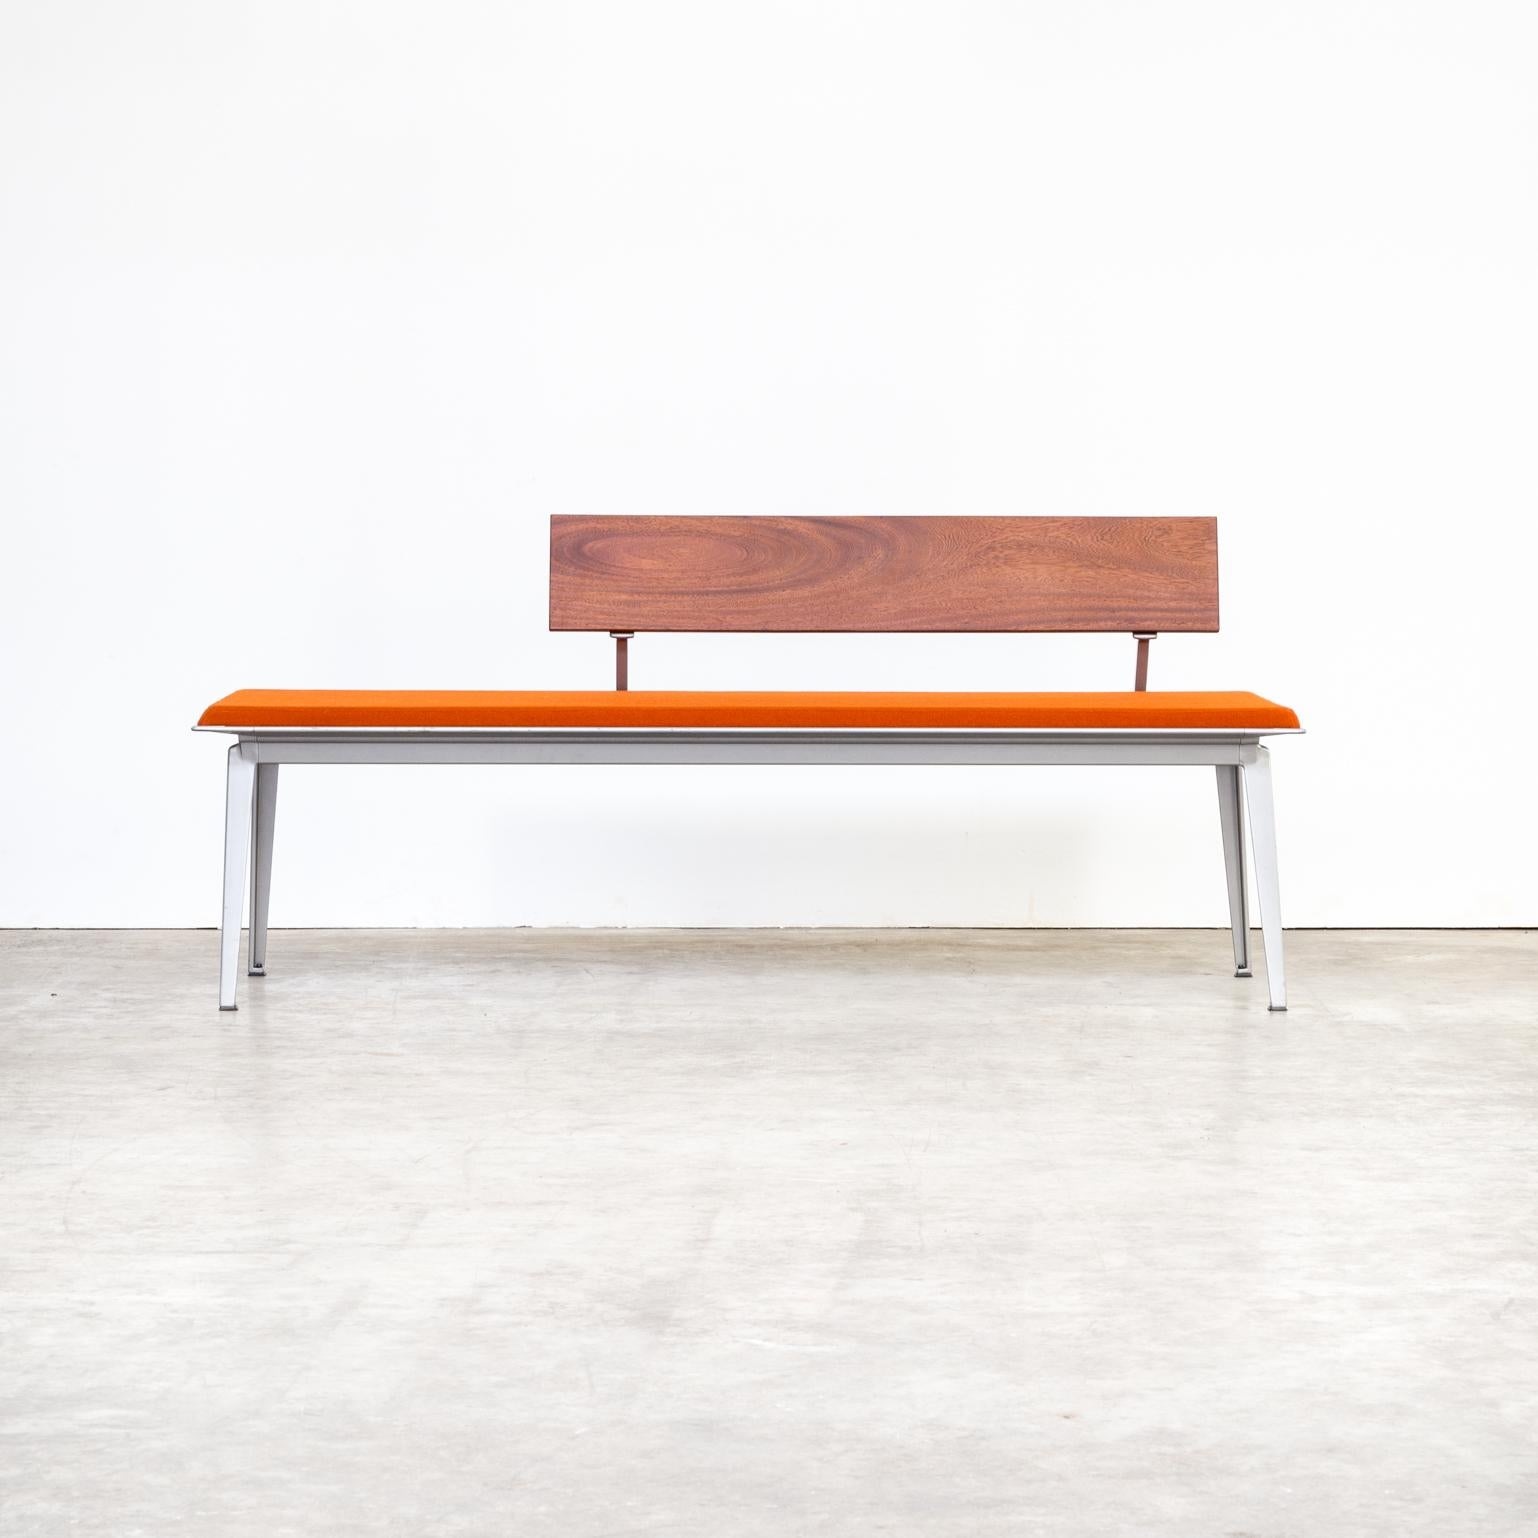 Late 20th Century 1990s Bas Pruyser ‘Ahrend 600’ Museum Bench for Ahrend de Cirkel For Sale